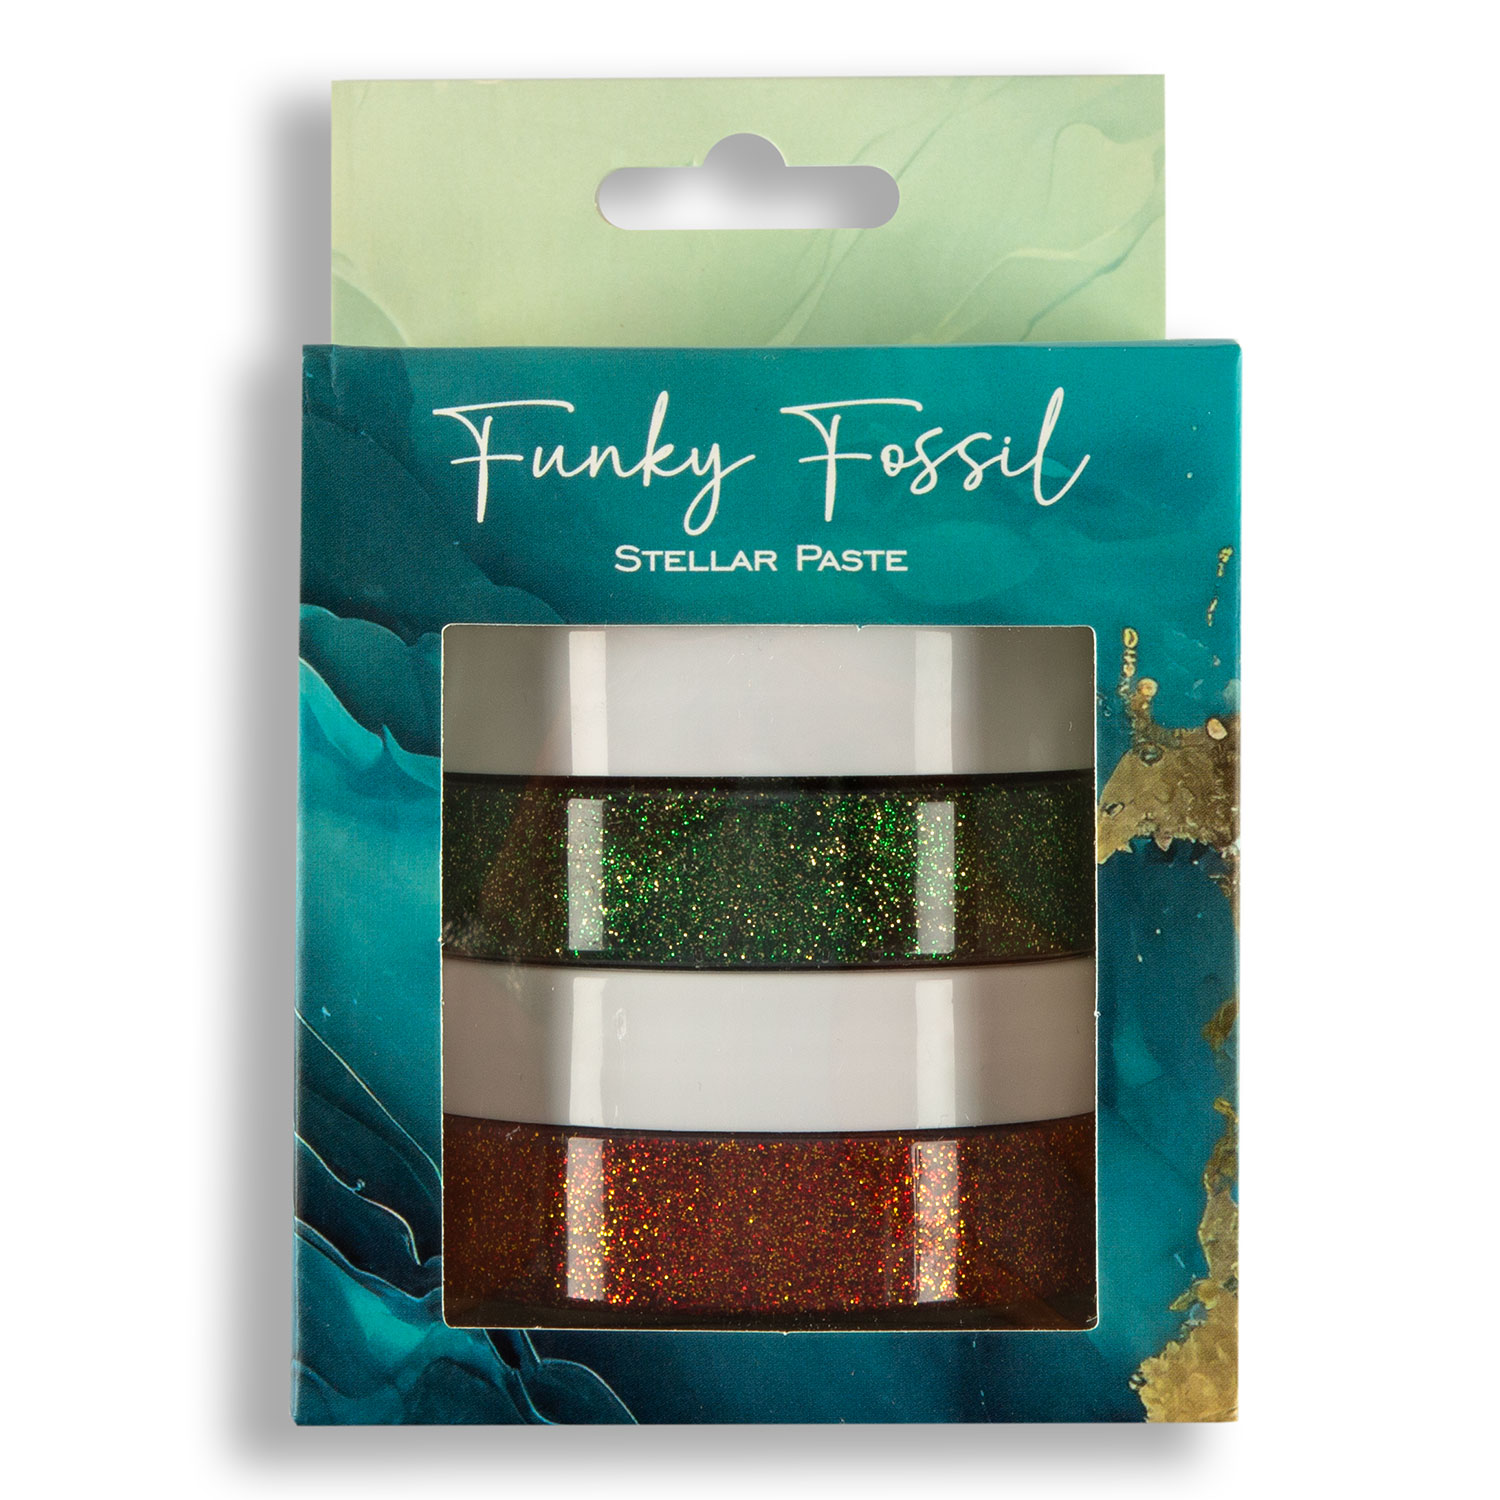 Funky Fossil Stellar Paste Pick-N-Mix - Choose Any 2 - Emerald City & Ruby Slippers